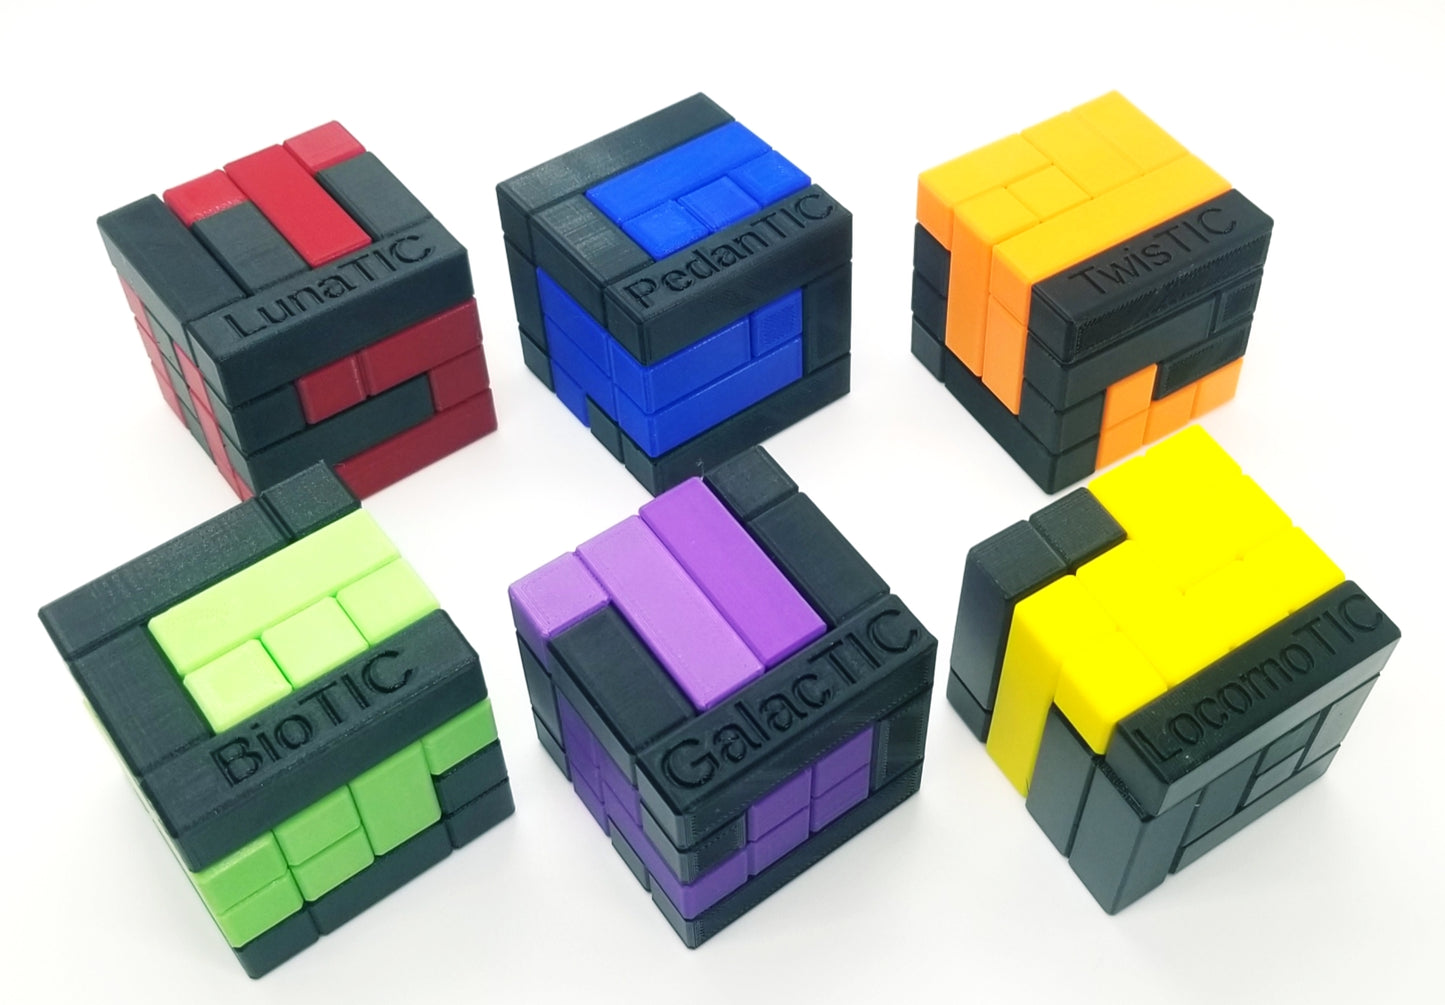 Difficult Turning Interlocking Cube Series - 3D Printed TIC Puzzles